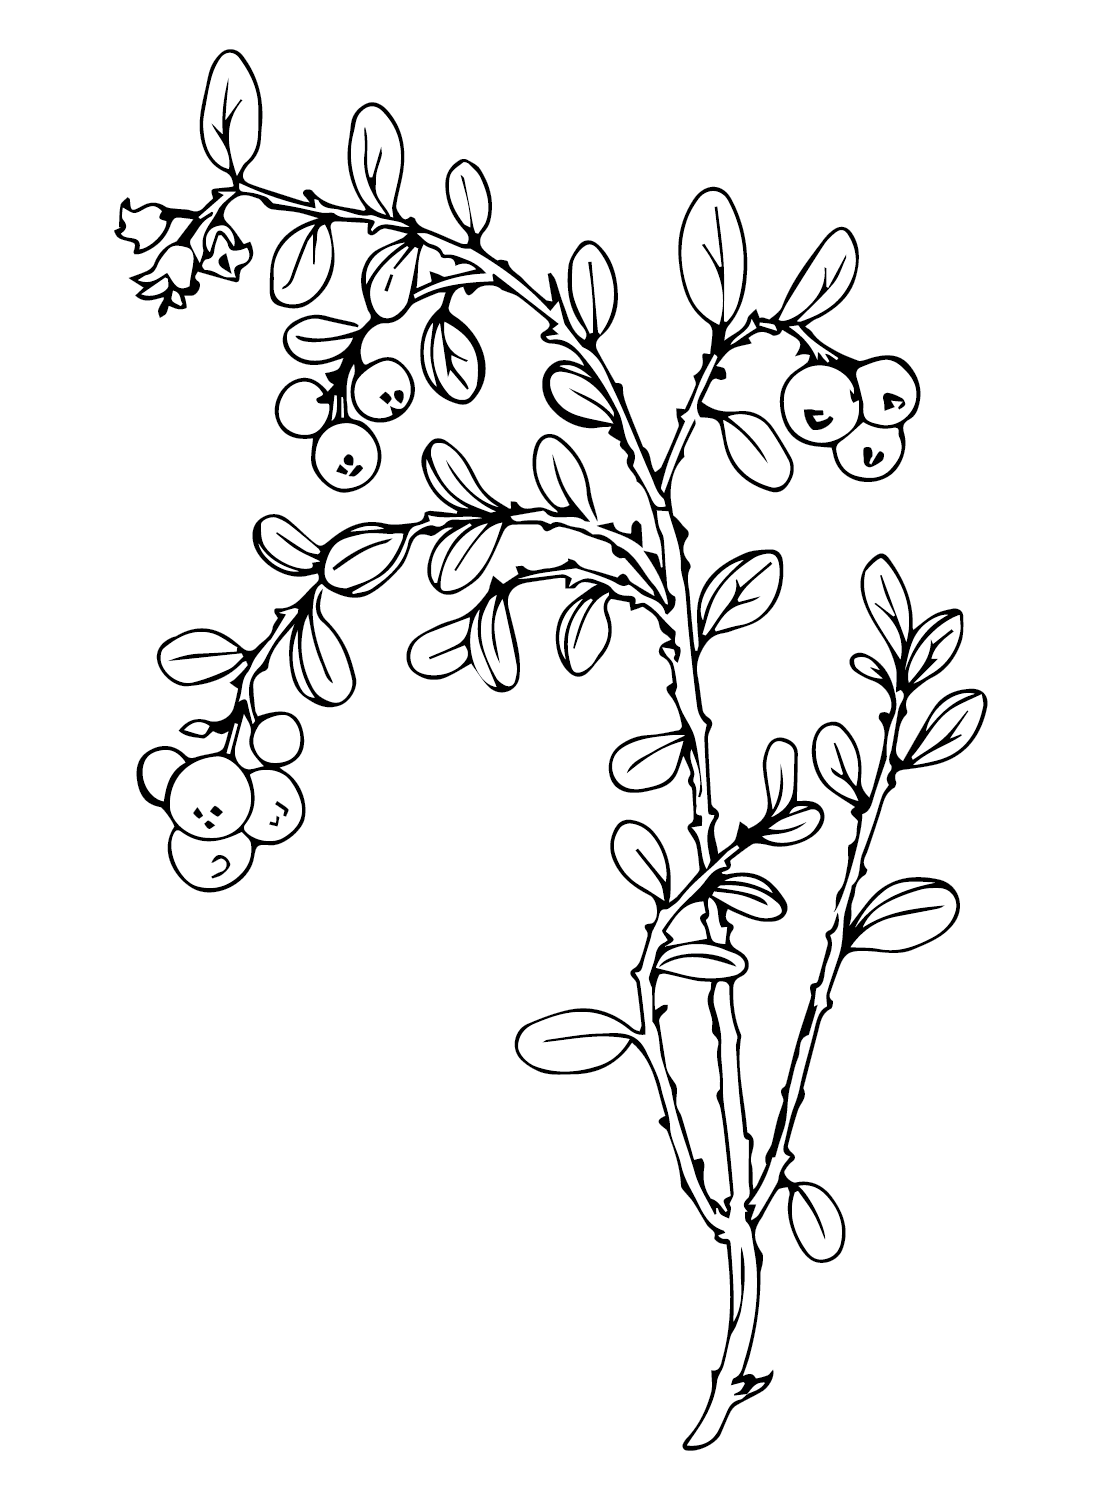 Huckleberry Branch Coloring Page